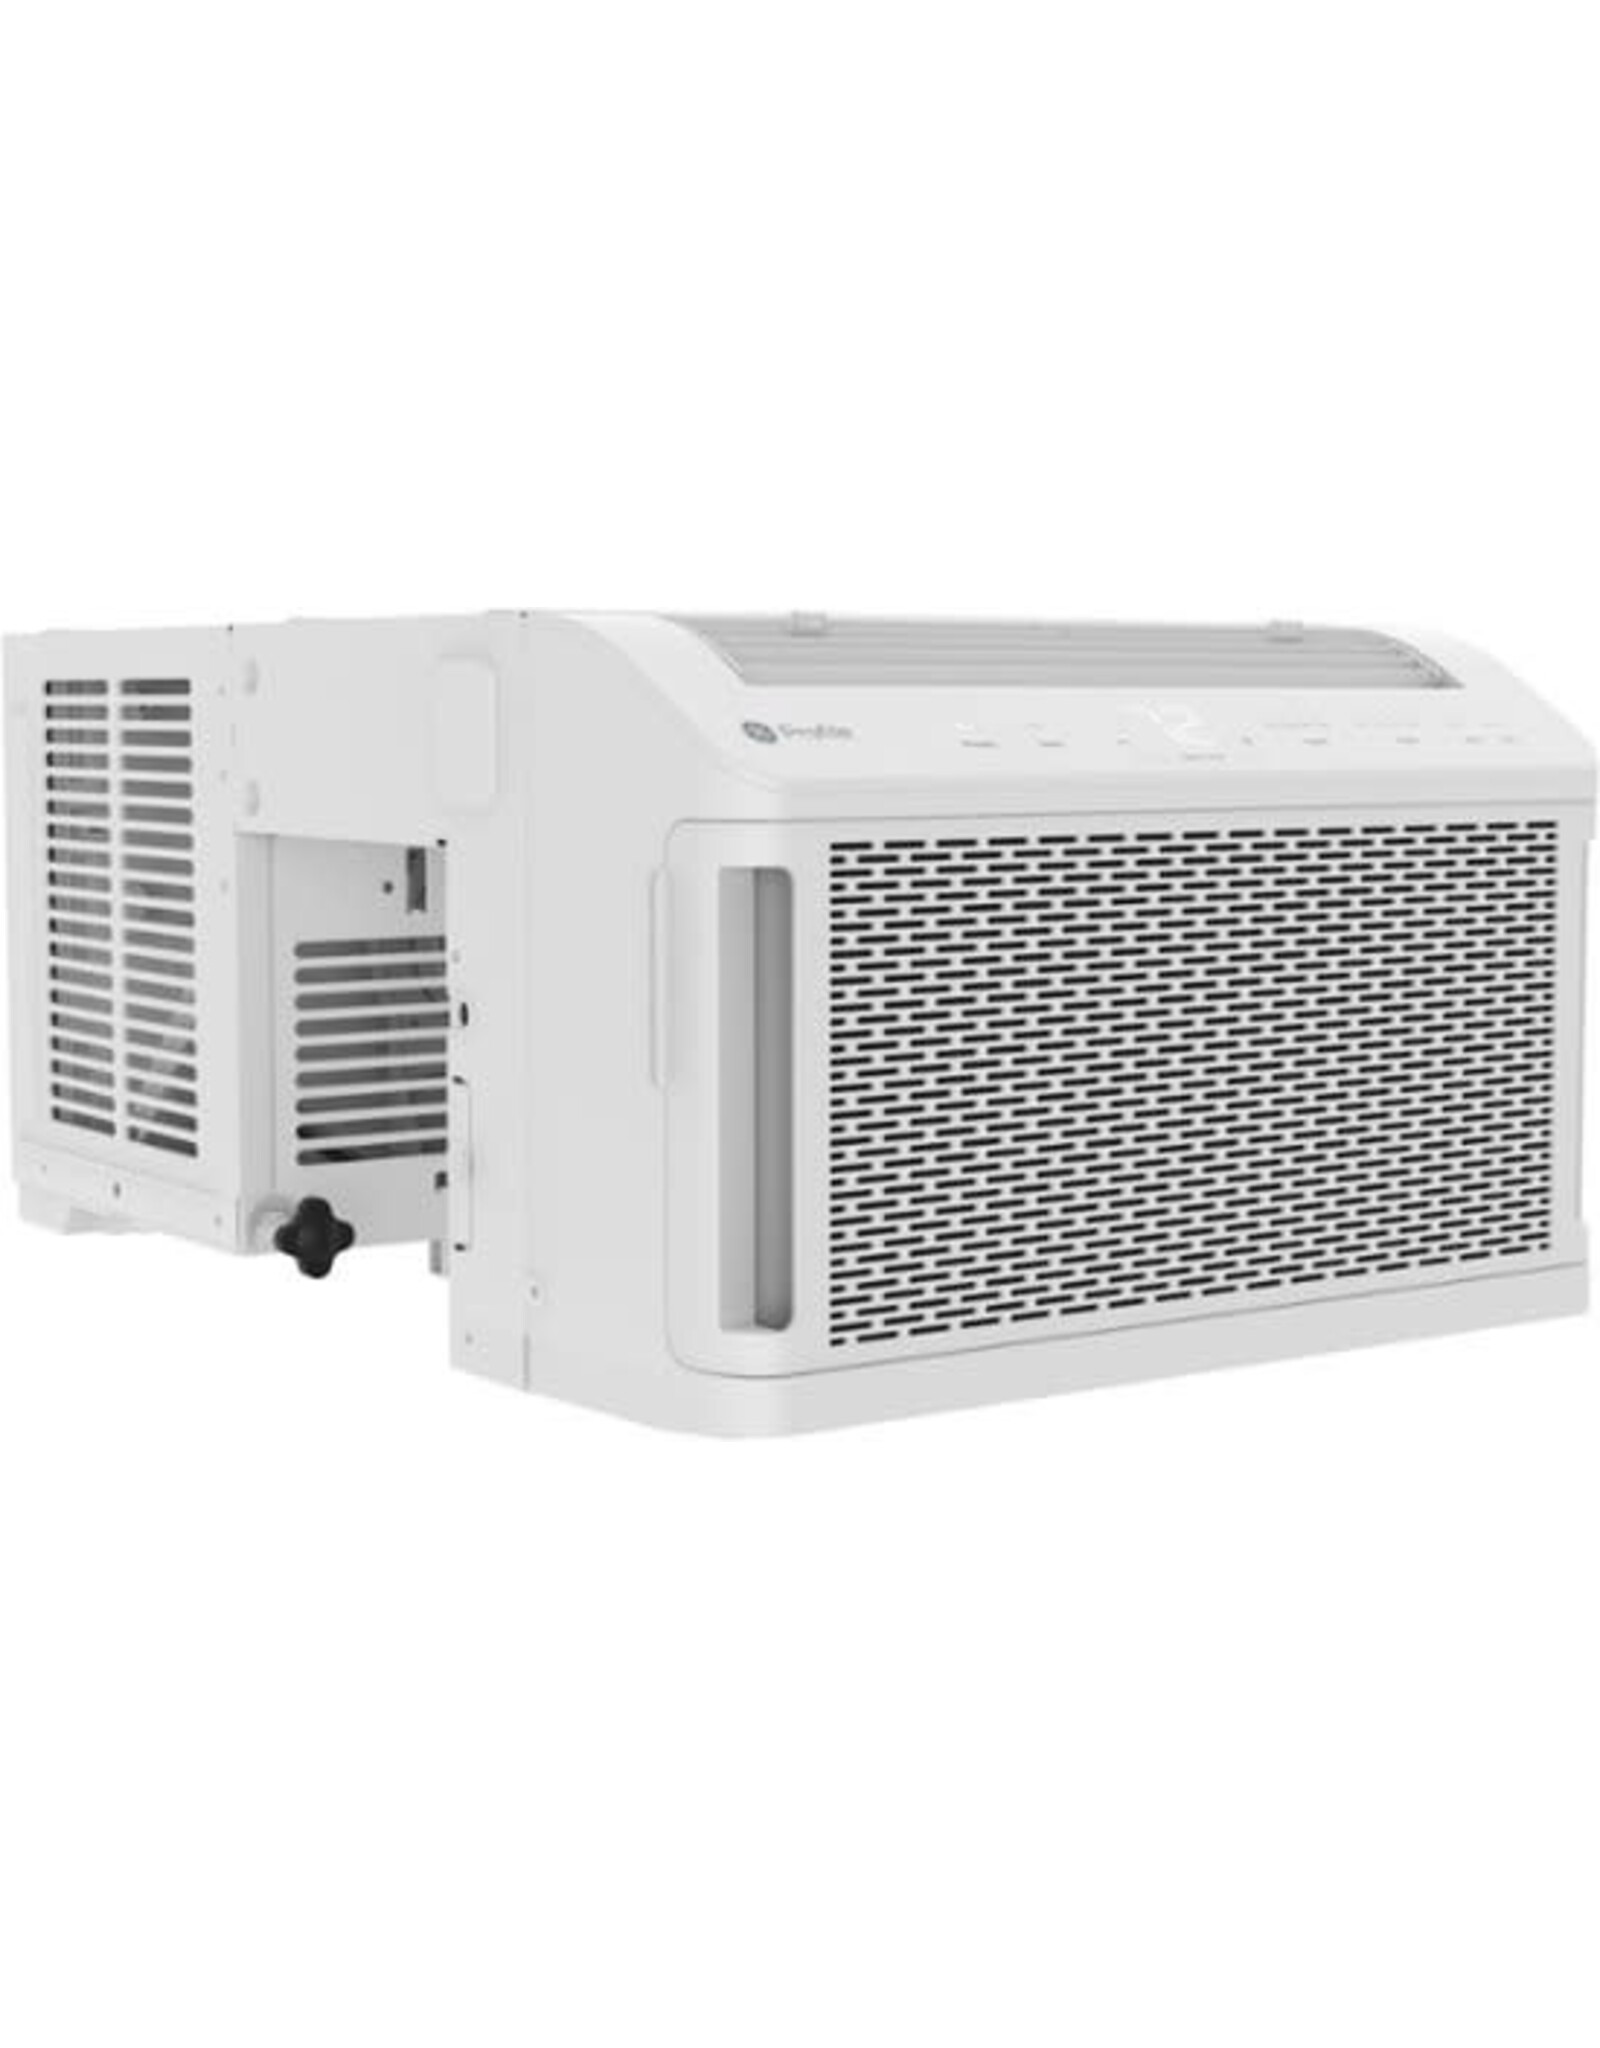 GE AHTT08BC-GE Profile - ClearView 350 sq. ft. 8,300 BTU Smart Ultra Quiet Window Air Conditioner with Wifi and Remote - White